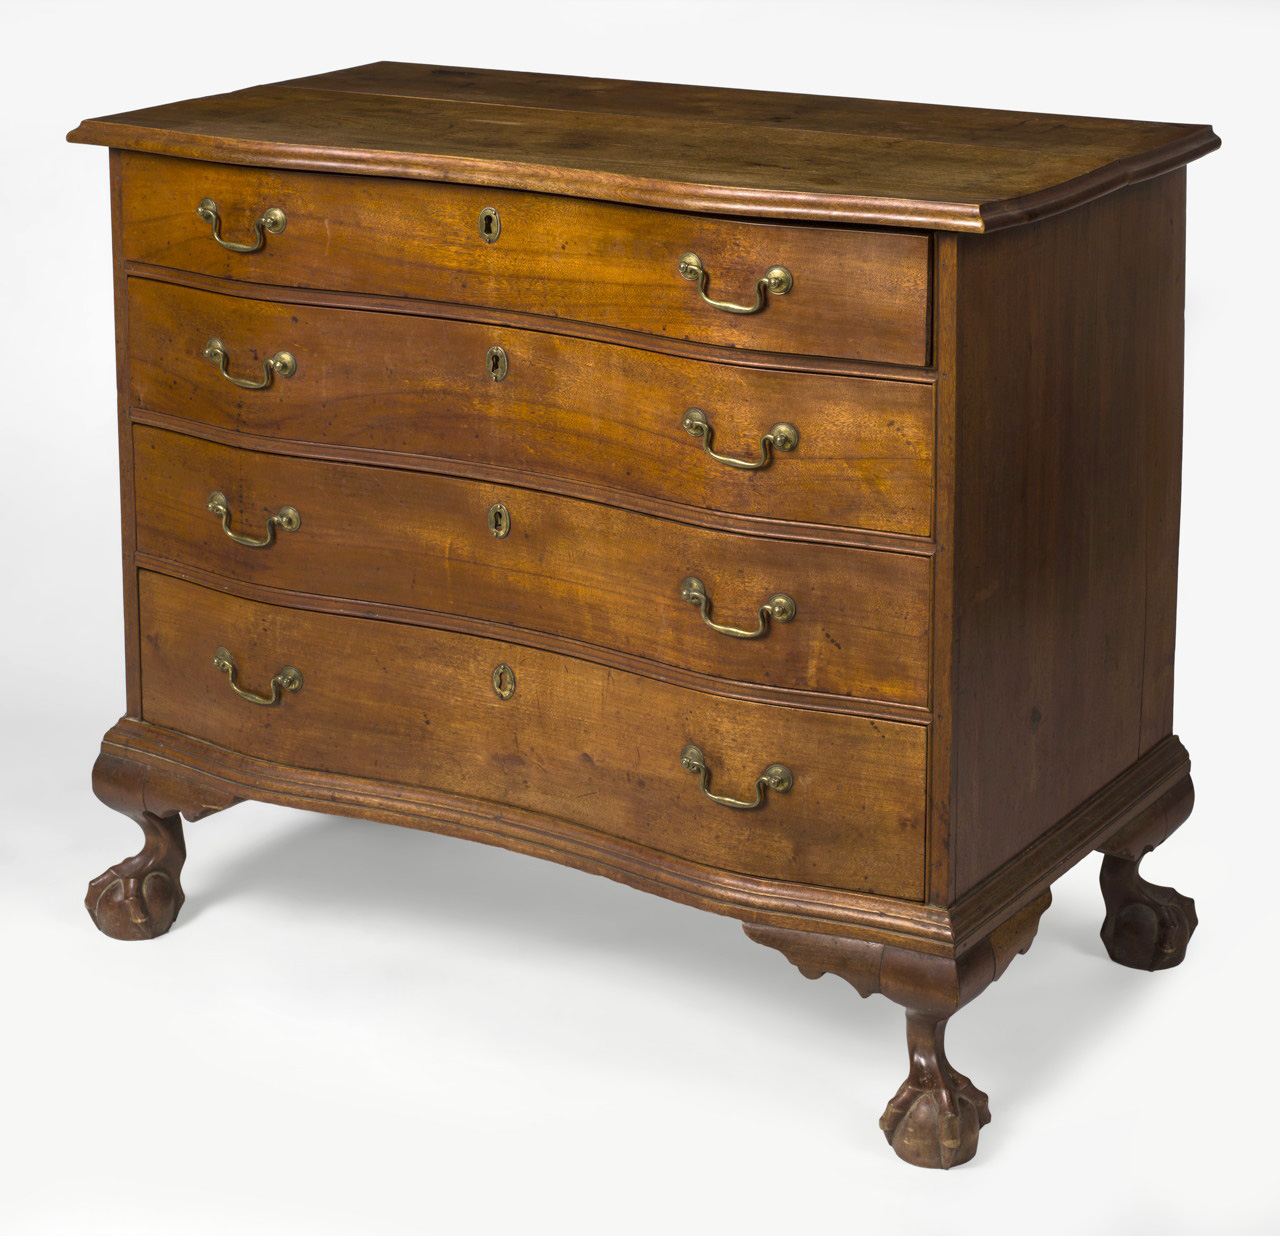 A classic North Shore Chippendale ox-bow or serpentine front chest